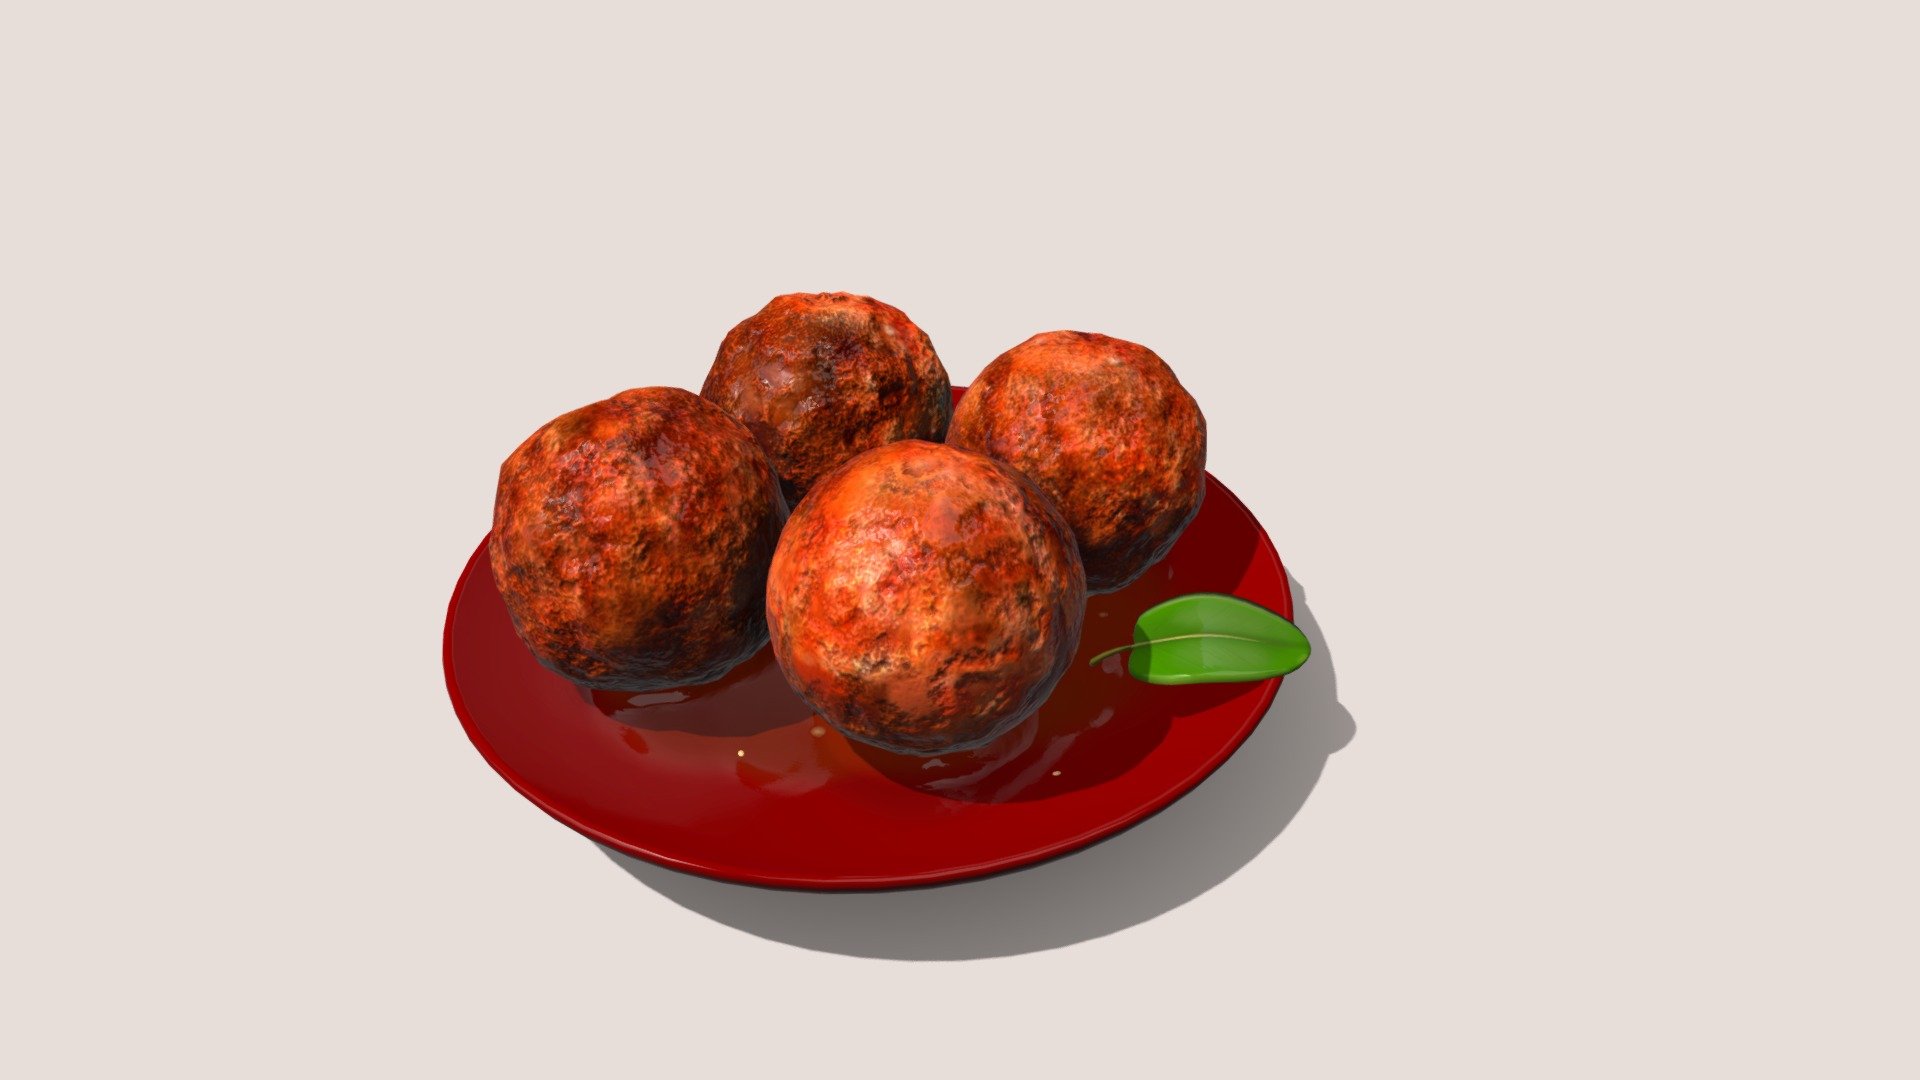 Hi~ It is a Asia food_Braised pork ball

It has 3152 Polys and 2946 Vertex.
It can be used in game,VR,AR,CG. 

It have 4 pics.

2048*2048 size

Albedo1
Ao1
MetallicSmoothness1
Normal1

Display pics use Substance painter to render.

I hope you like it~

Thank you.If you have any question , please tell me 3d model